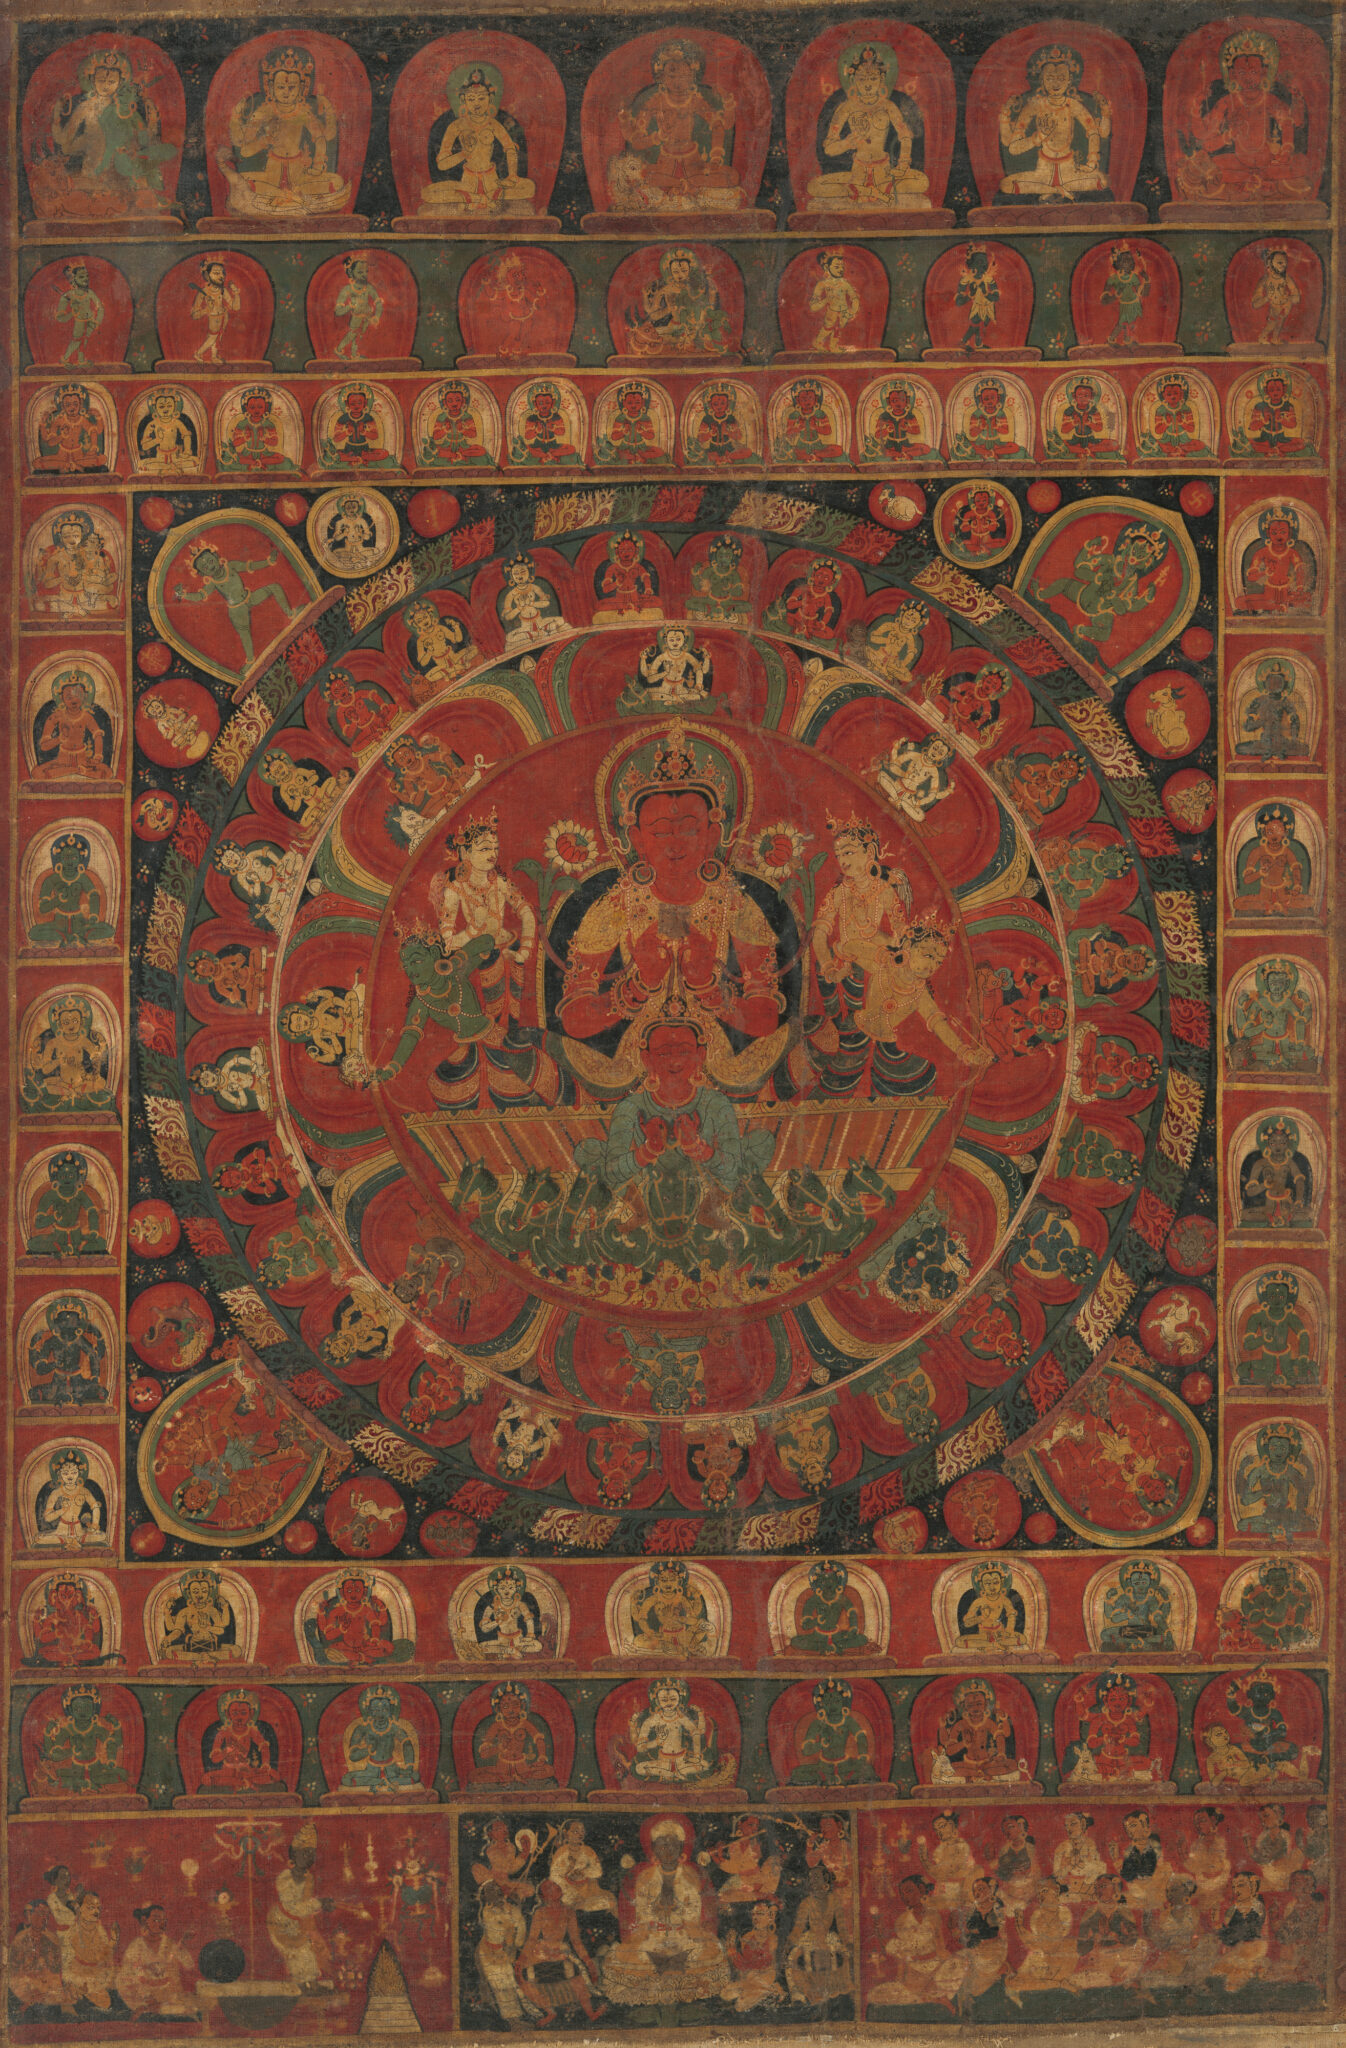 Red-toned mandala featuring deity surrounded by multitude of deity portraits arranged in registers